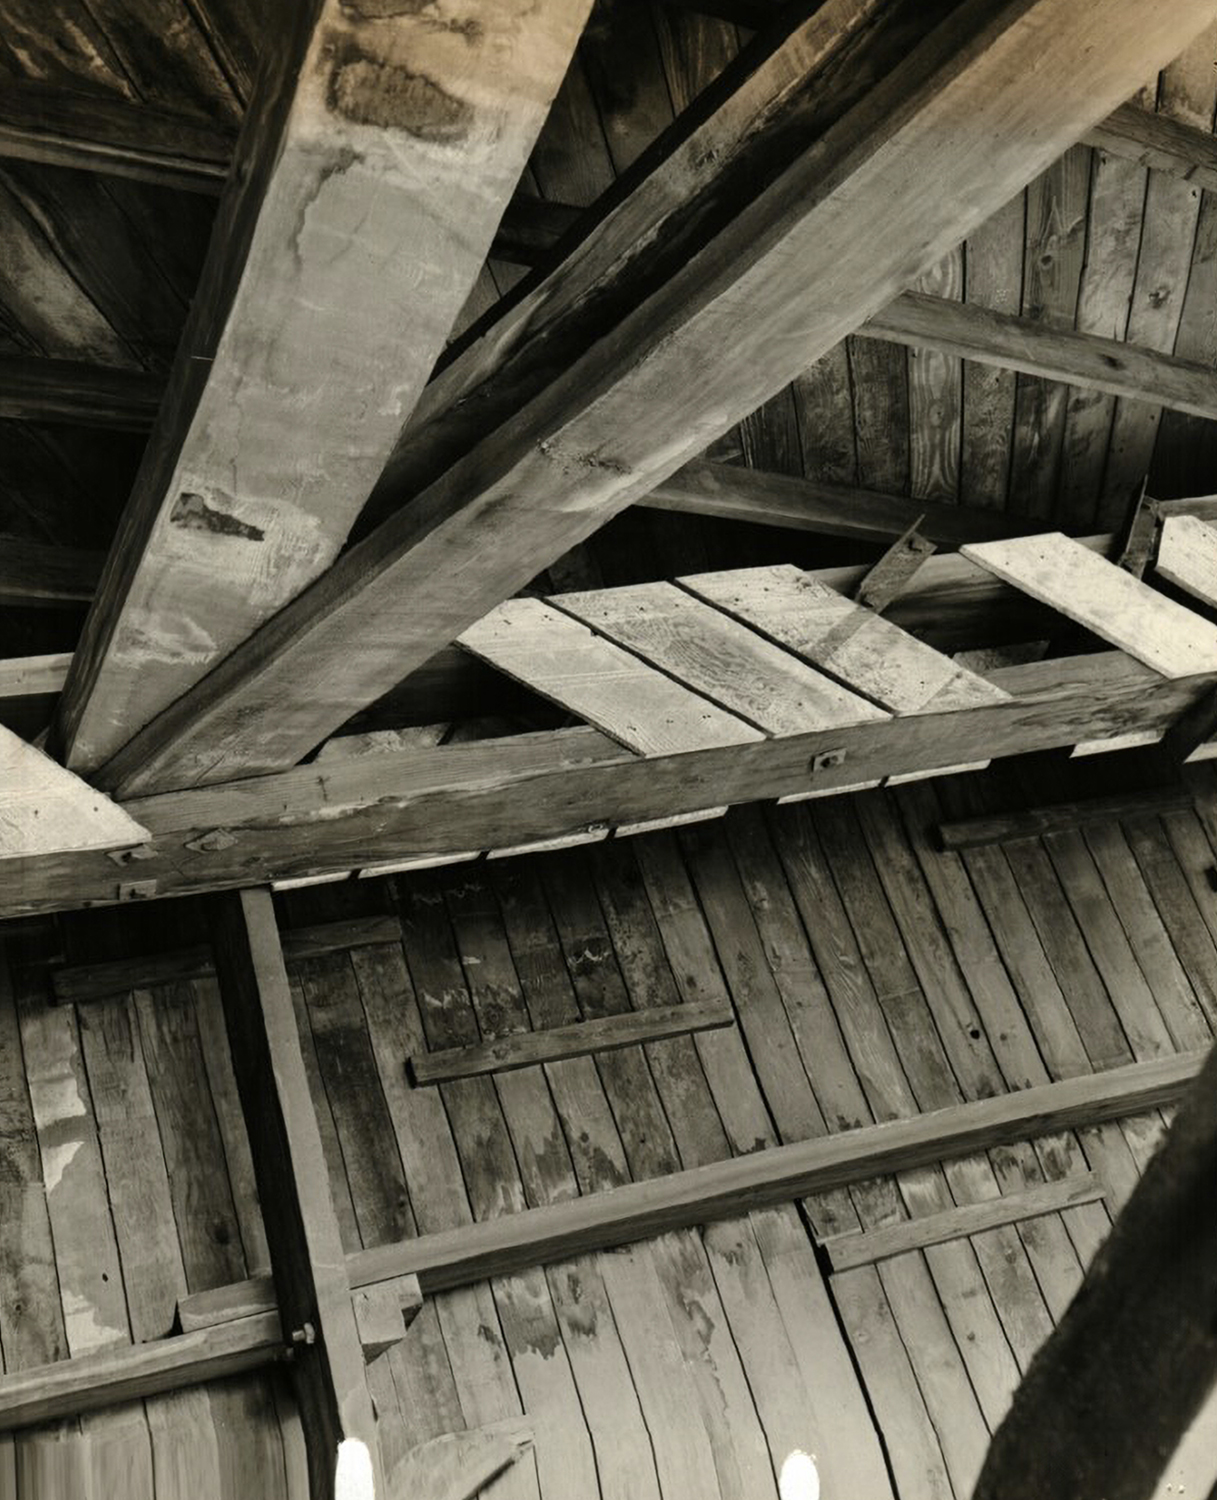 A close-up view of the damaged condition of the wood trusses and the wood roof planks inside Hangar 3.